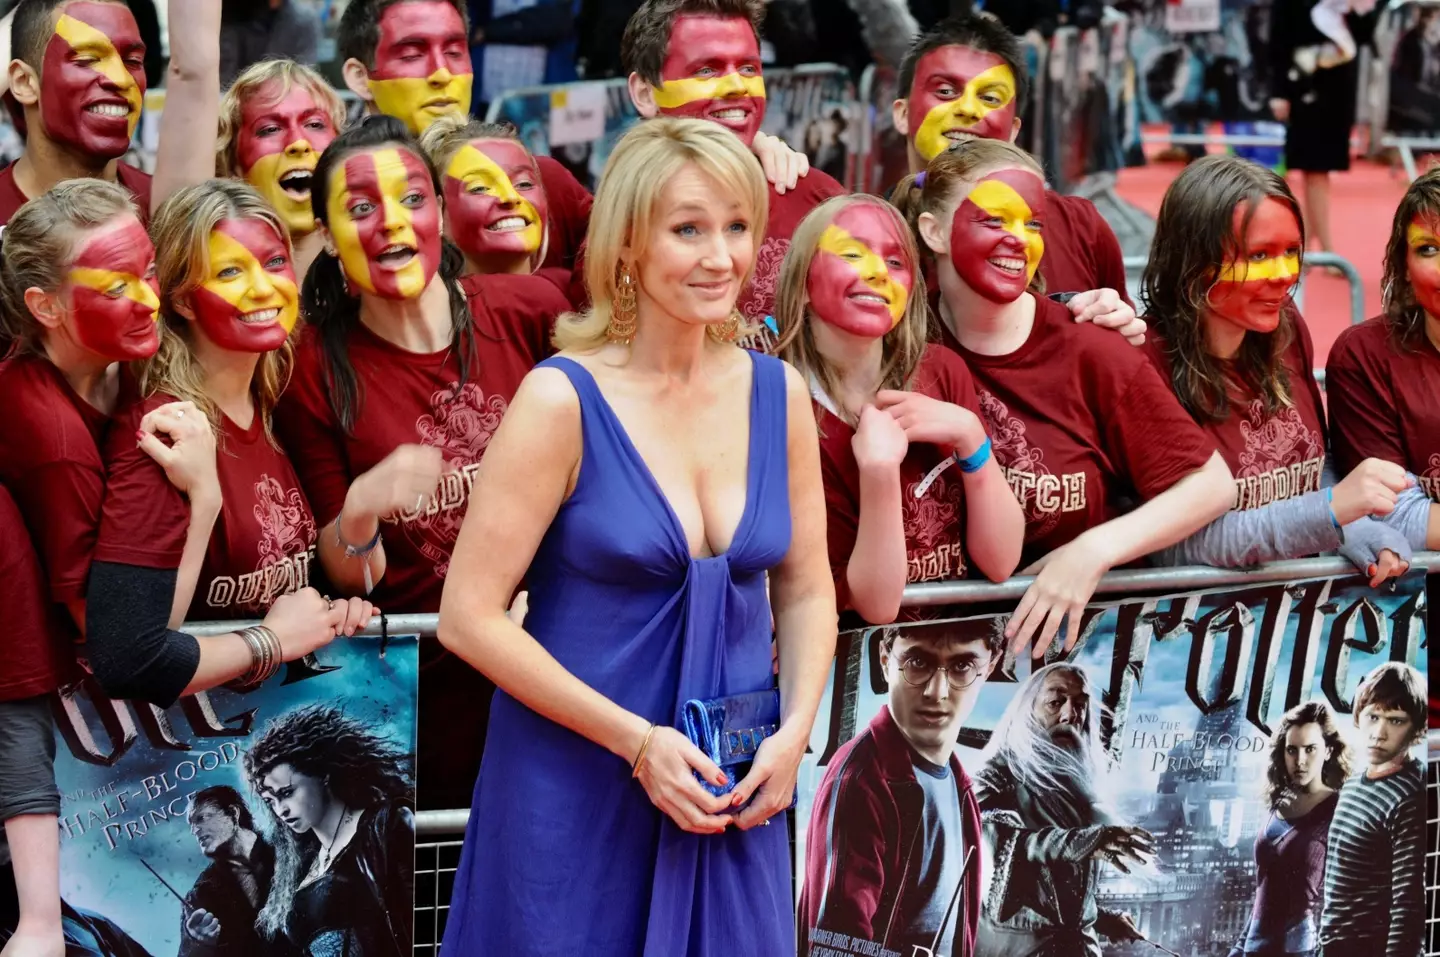 JK Rowling at the London premiere of Harry Potter and the Half Blood Prince.